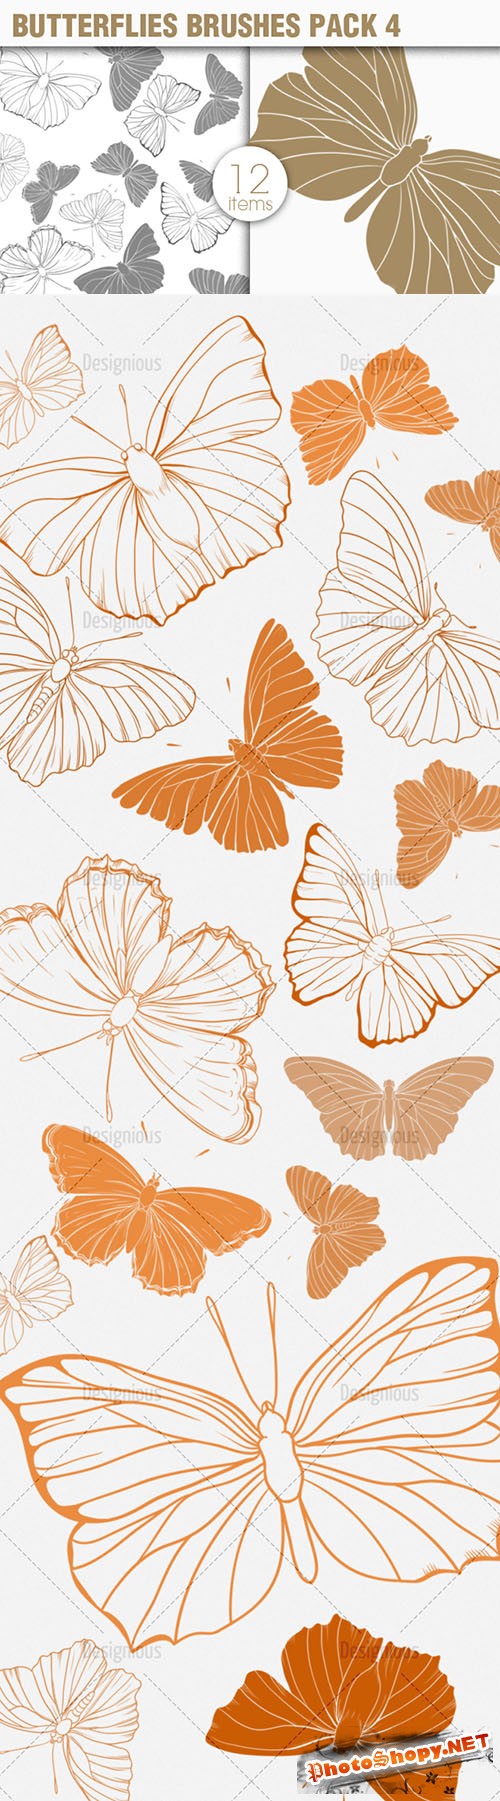 Butterflies Photoshop Brushes Pack 4